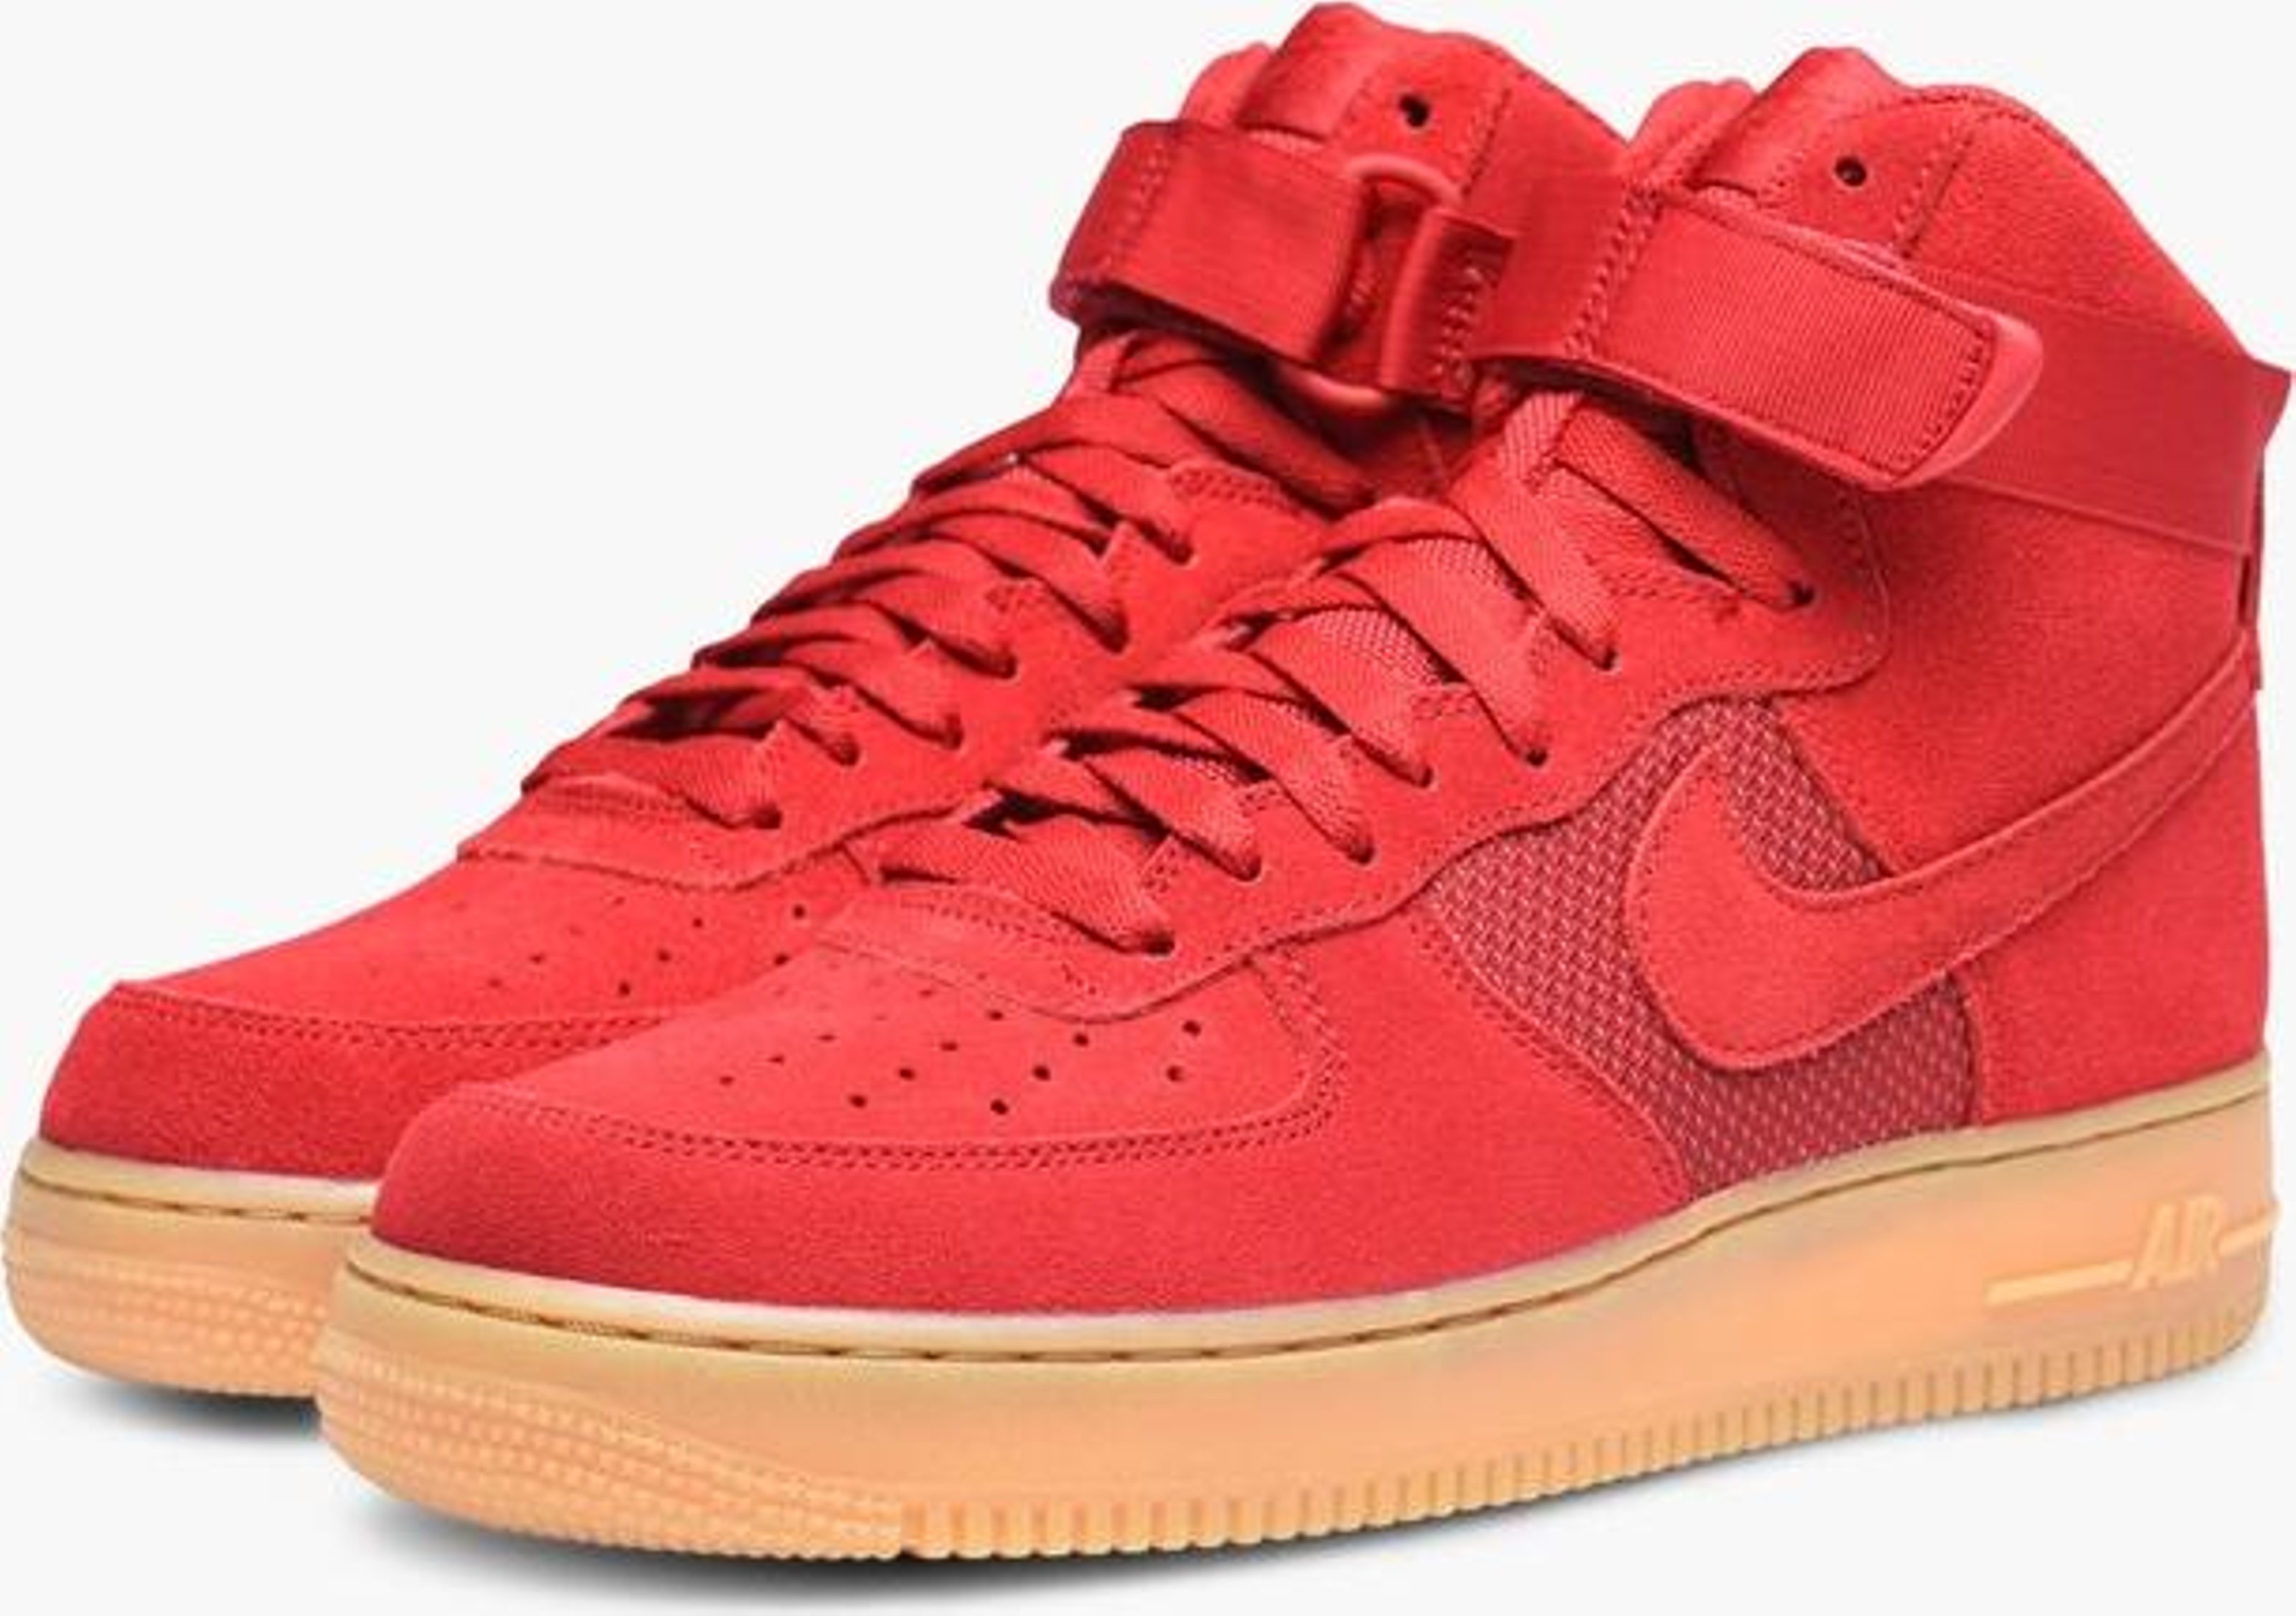 Buy Air Force 1 High '07 LV8 'Gym Red' - 806403 601 | GOAT